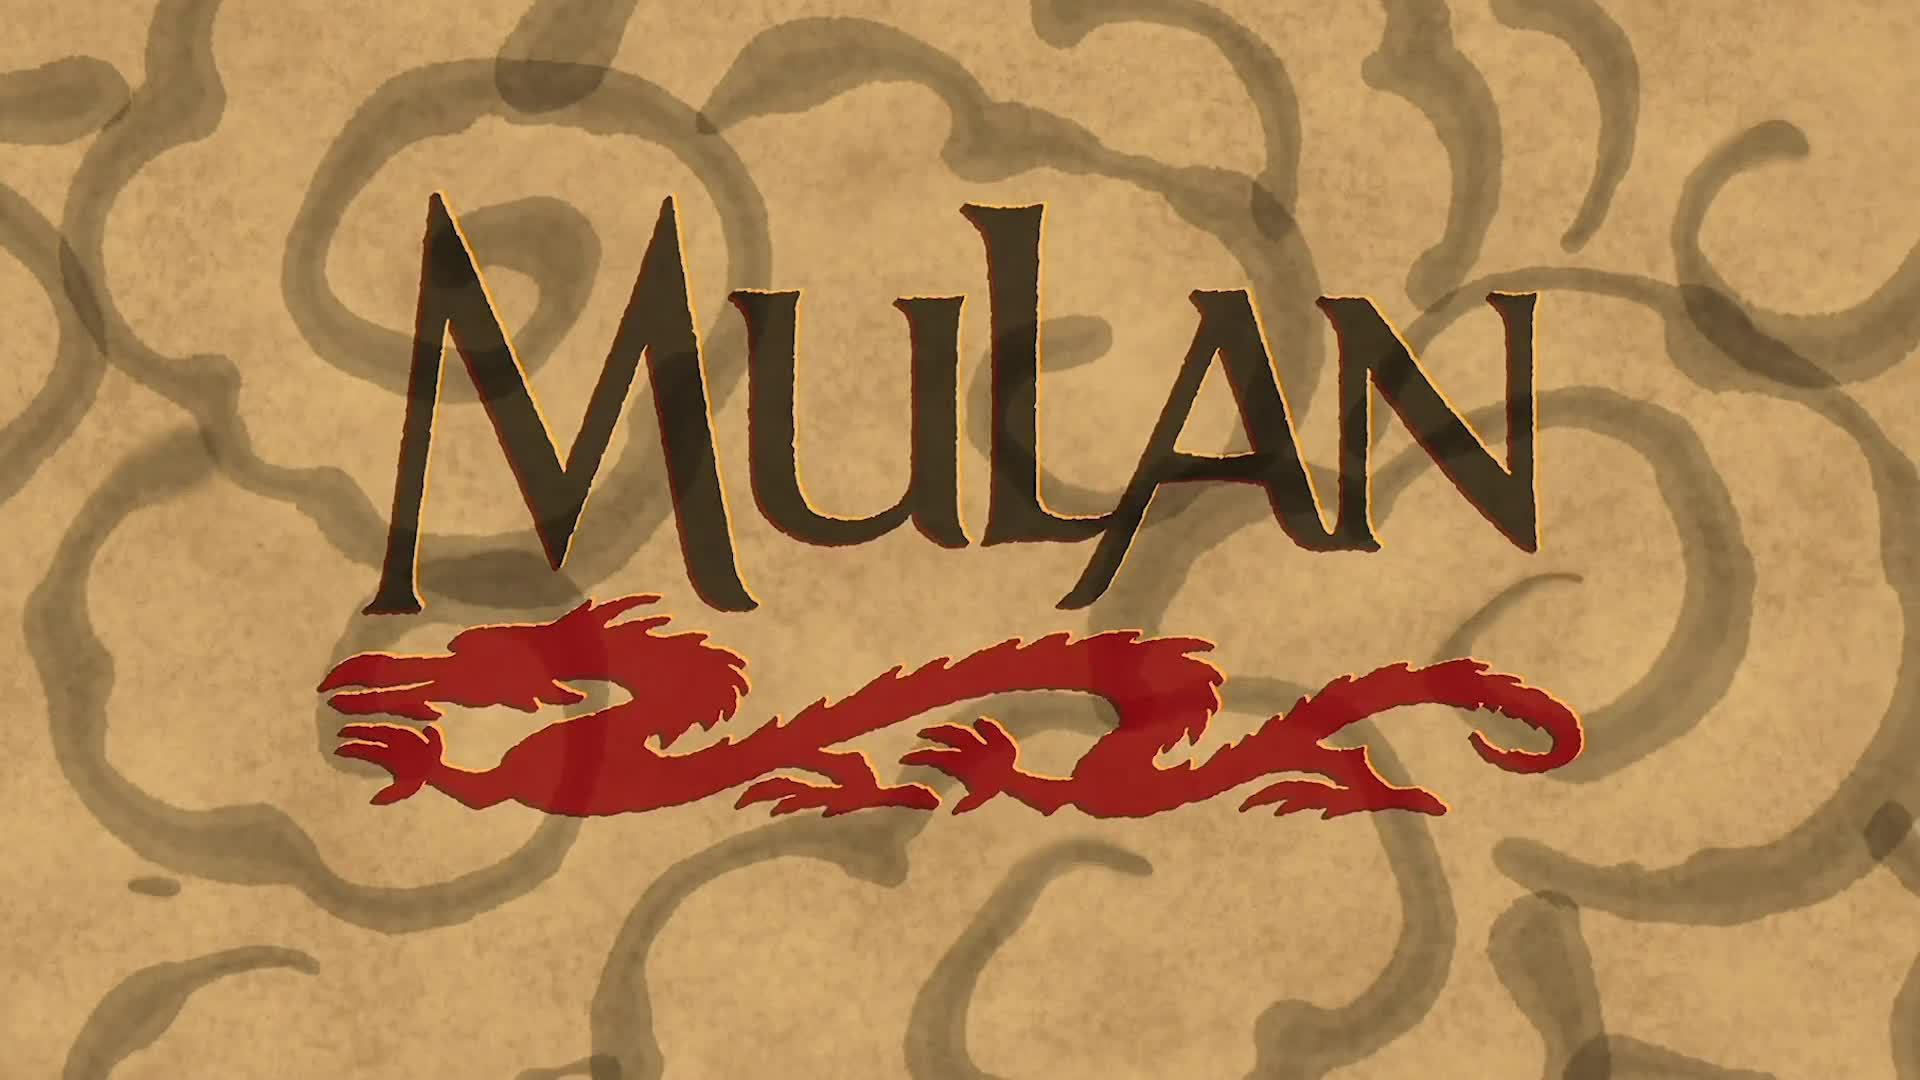 Mulan | 10 Quirky Facts About Mulan in 60 seconds